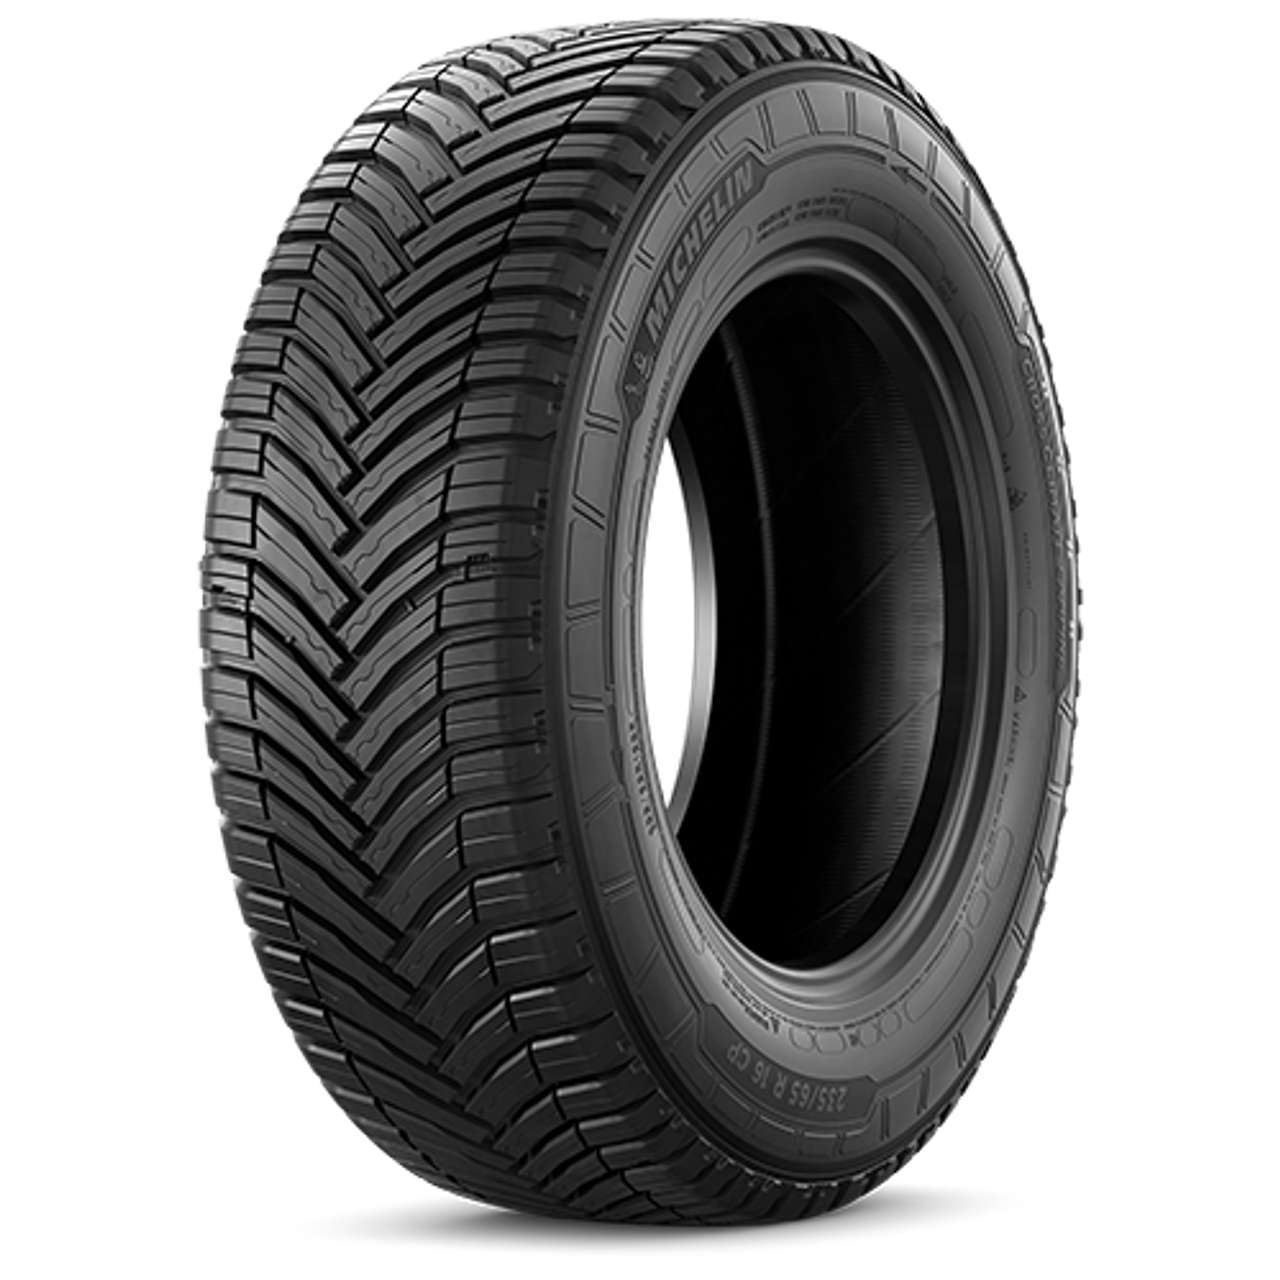 MICHELIN CROSSCLIMATE CAMPING 225/70R15C 112R BSW